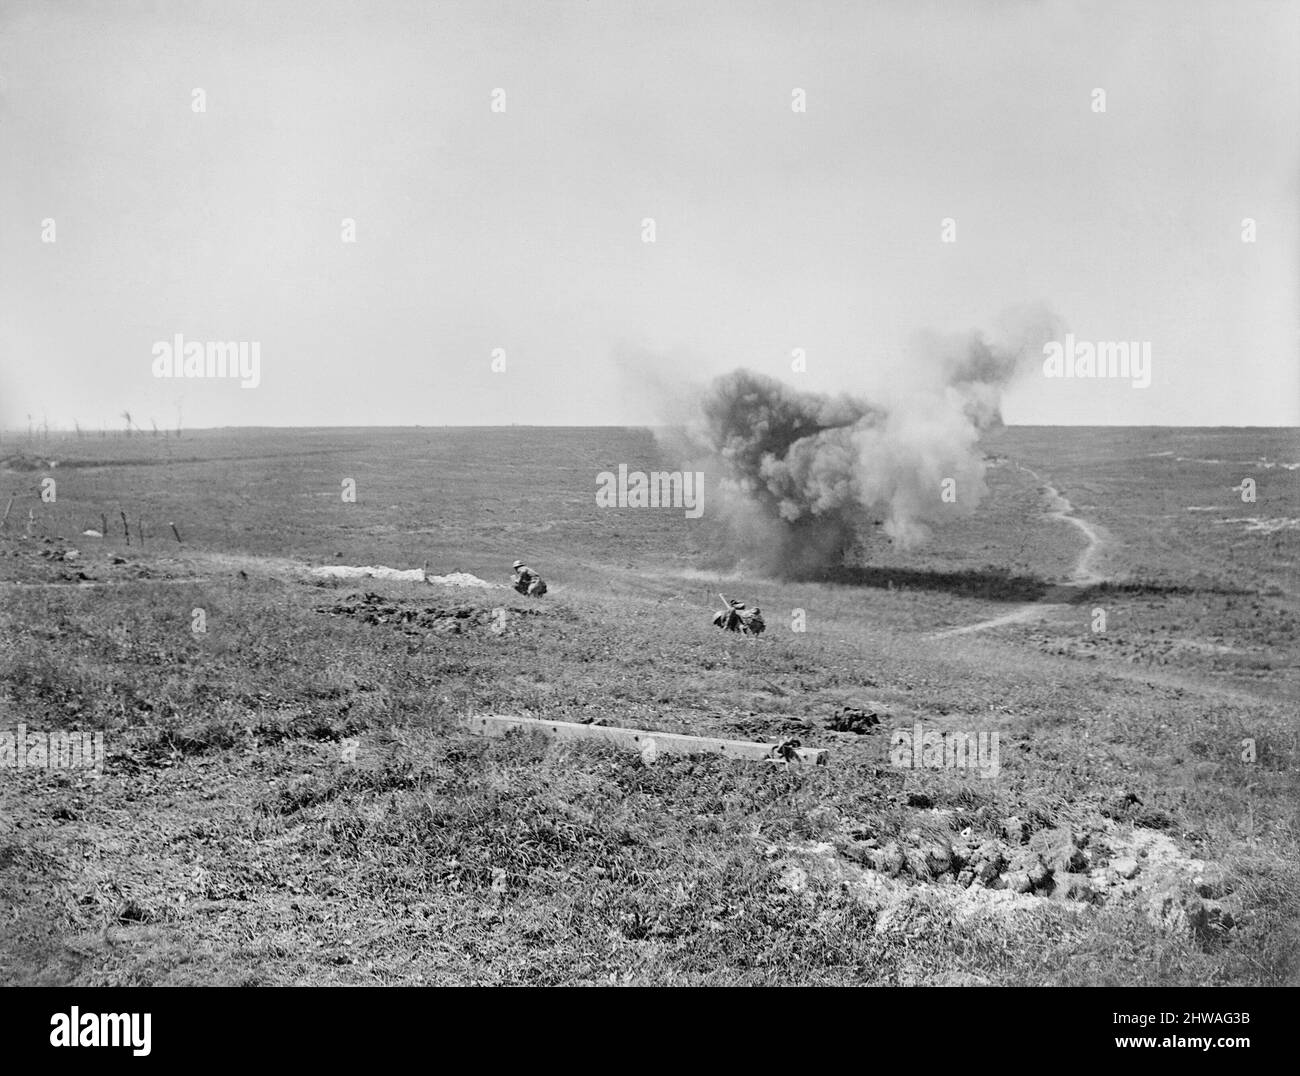 Second Battle of the Somme 1918. German shell burst showing two soldiers ducking in foreground. Near Courcelles, 21 August 1918. Stock Photo